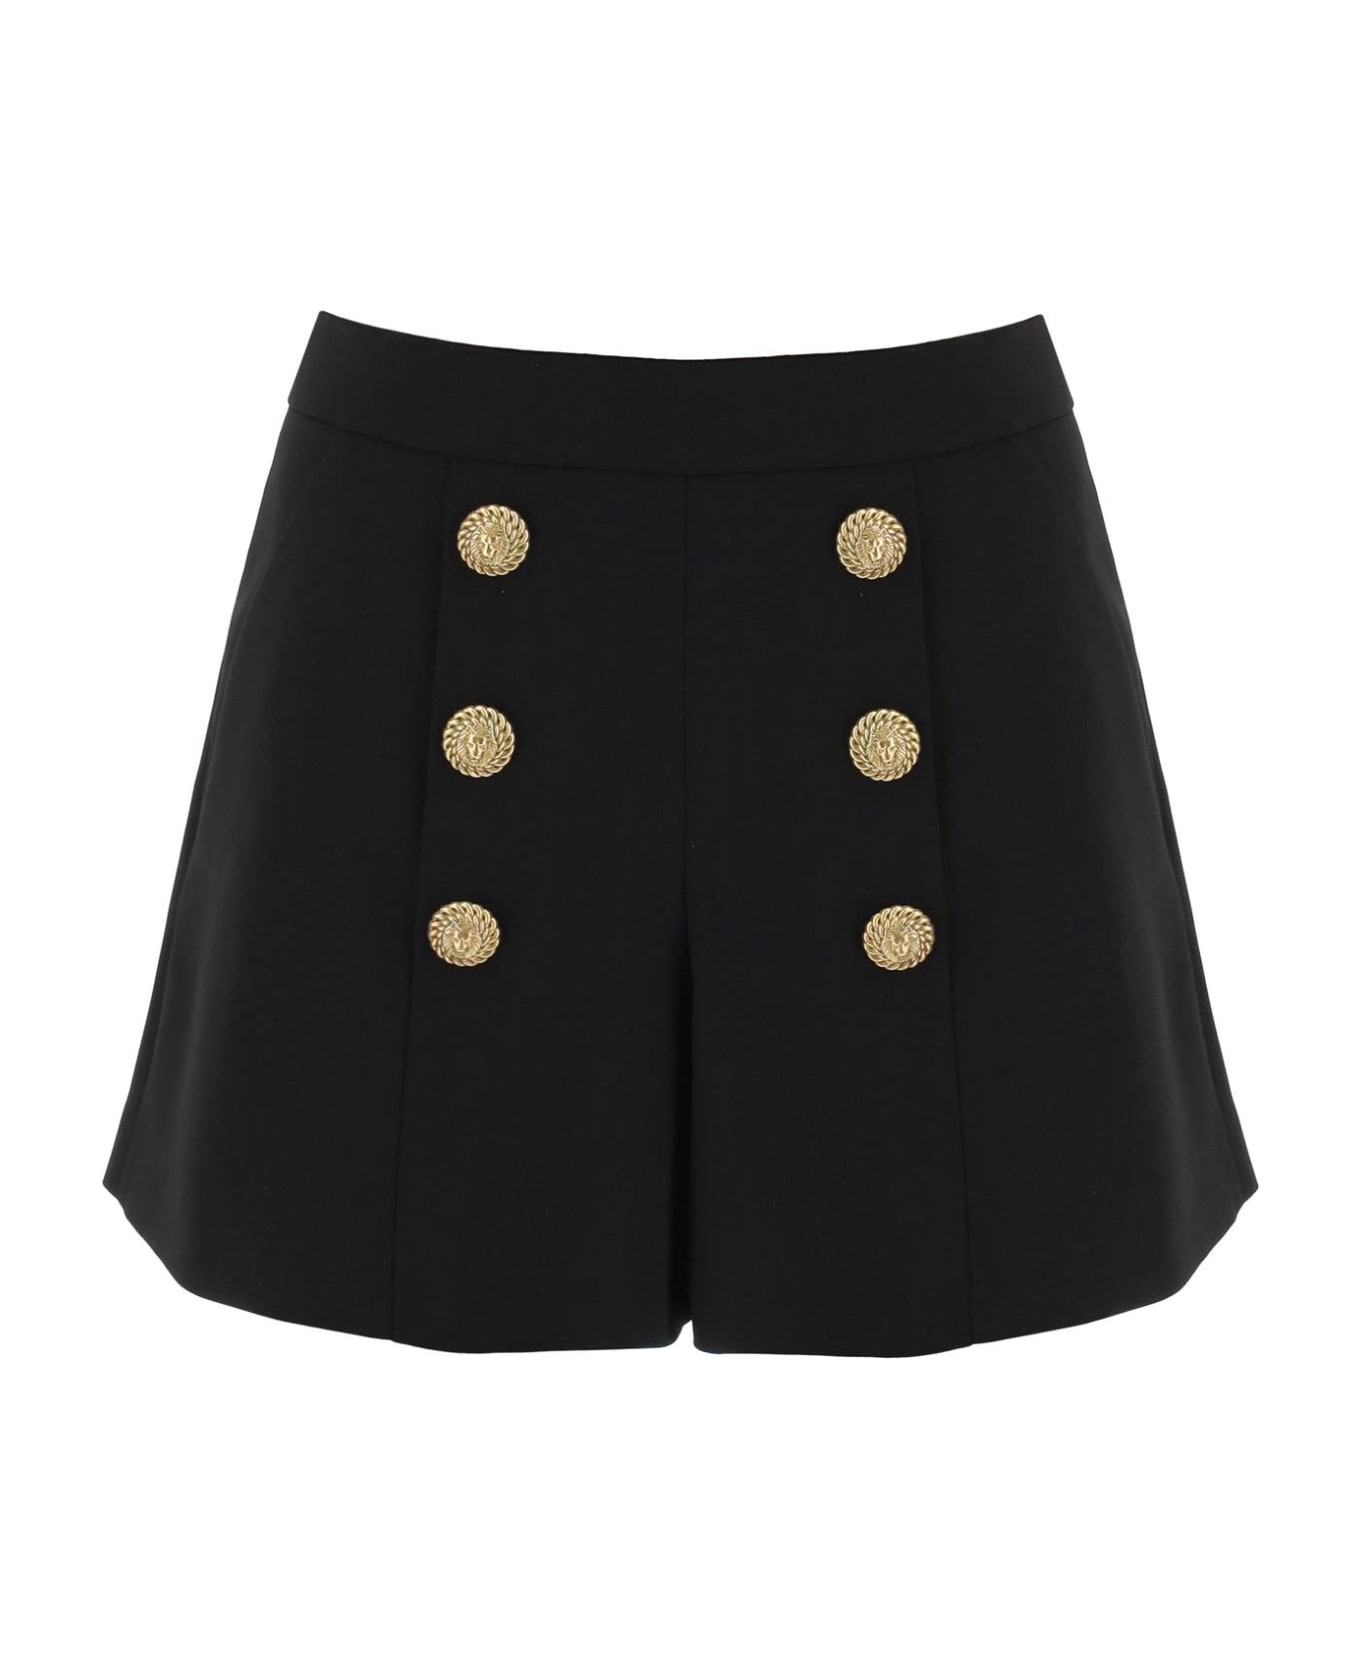 Balmain Crepe Shorts With Embossed Buttons - Black ショートパンツ